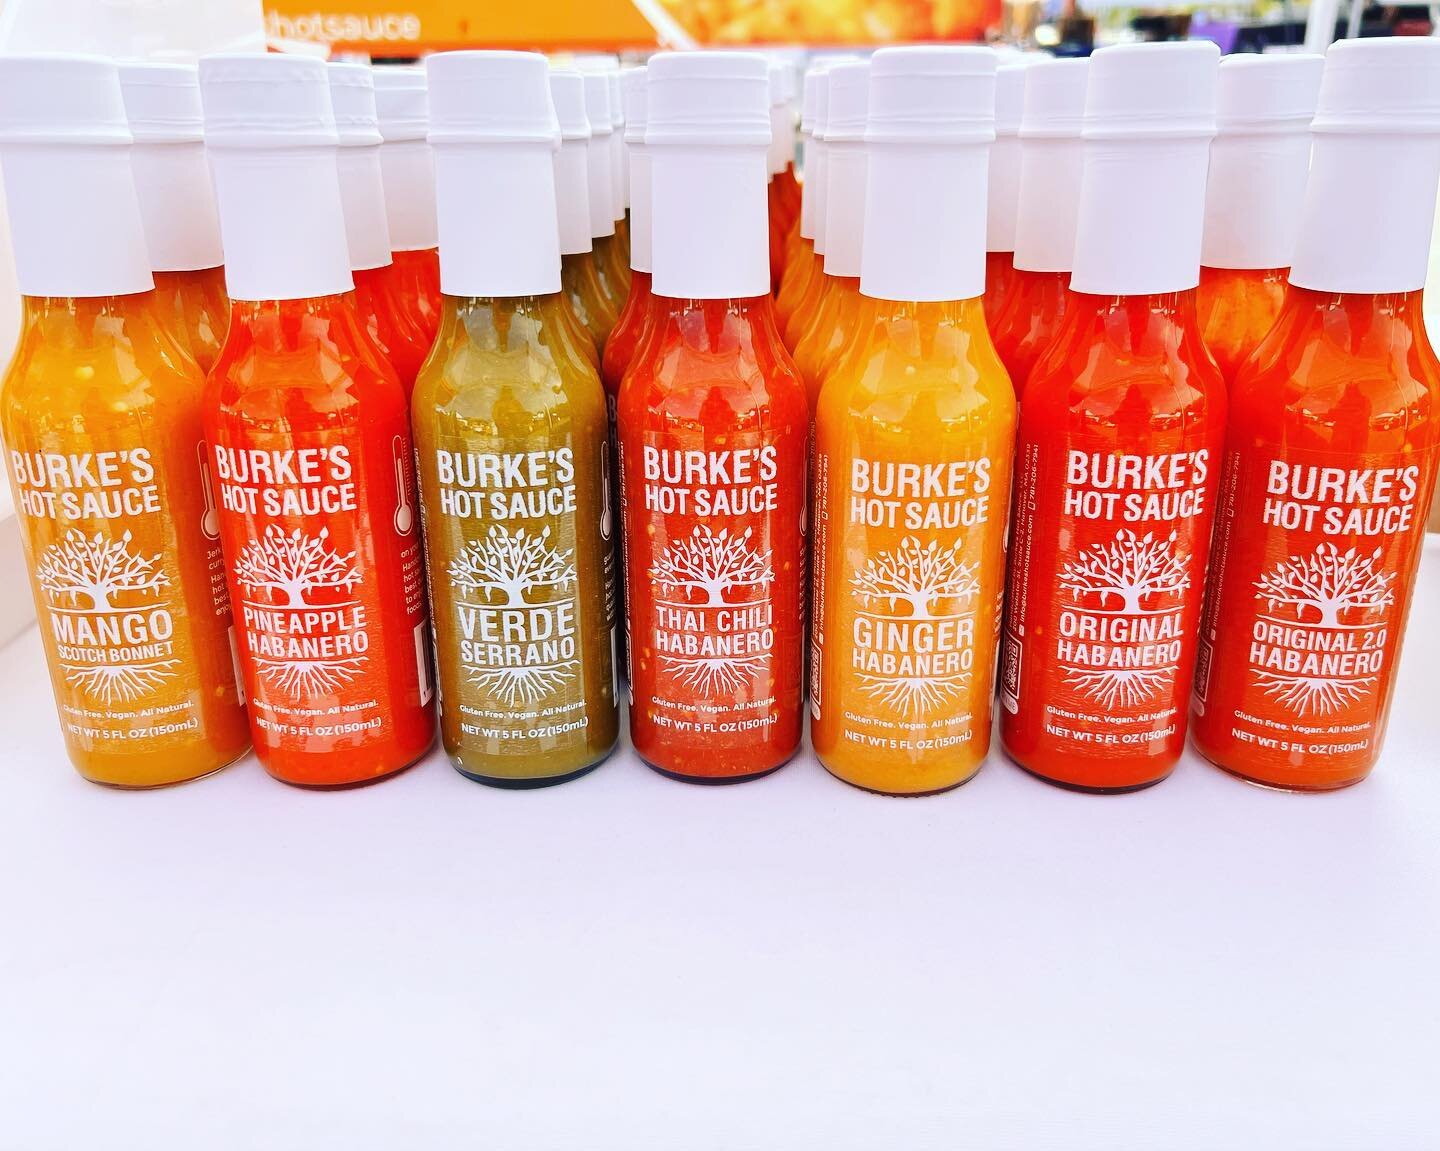 Good morning, weekend! We&rsquo;re ready for you!

@hinghamfarmersmarket today from 9-1 pm. Come see us!
#hinghamfarmersmarket #hingham #southshorema

#weekendvibes #burkeshotsauce #hotsauce